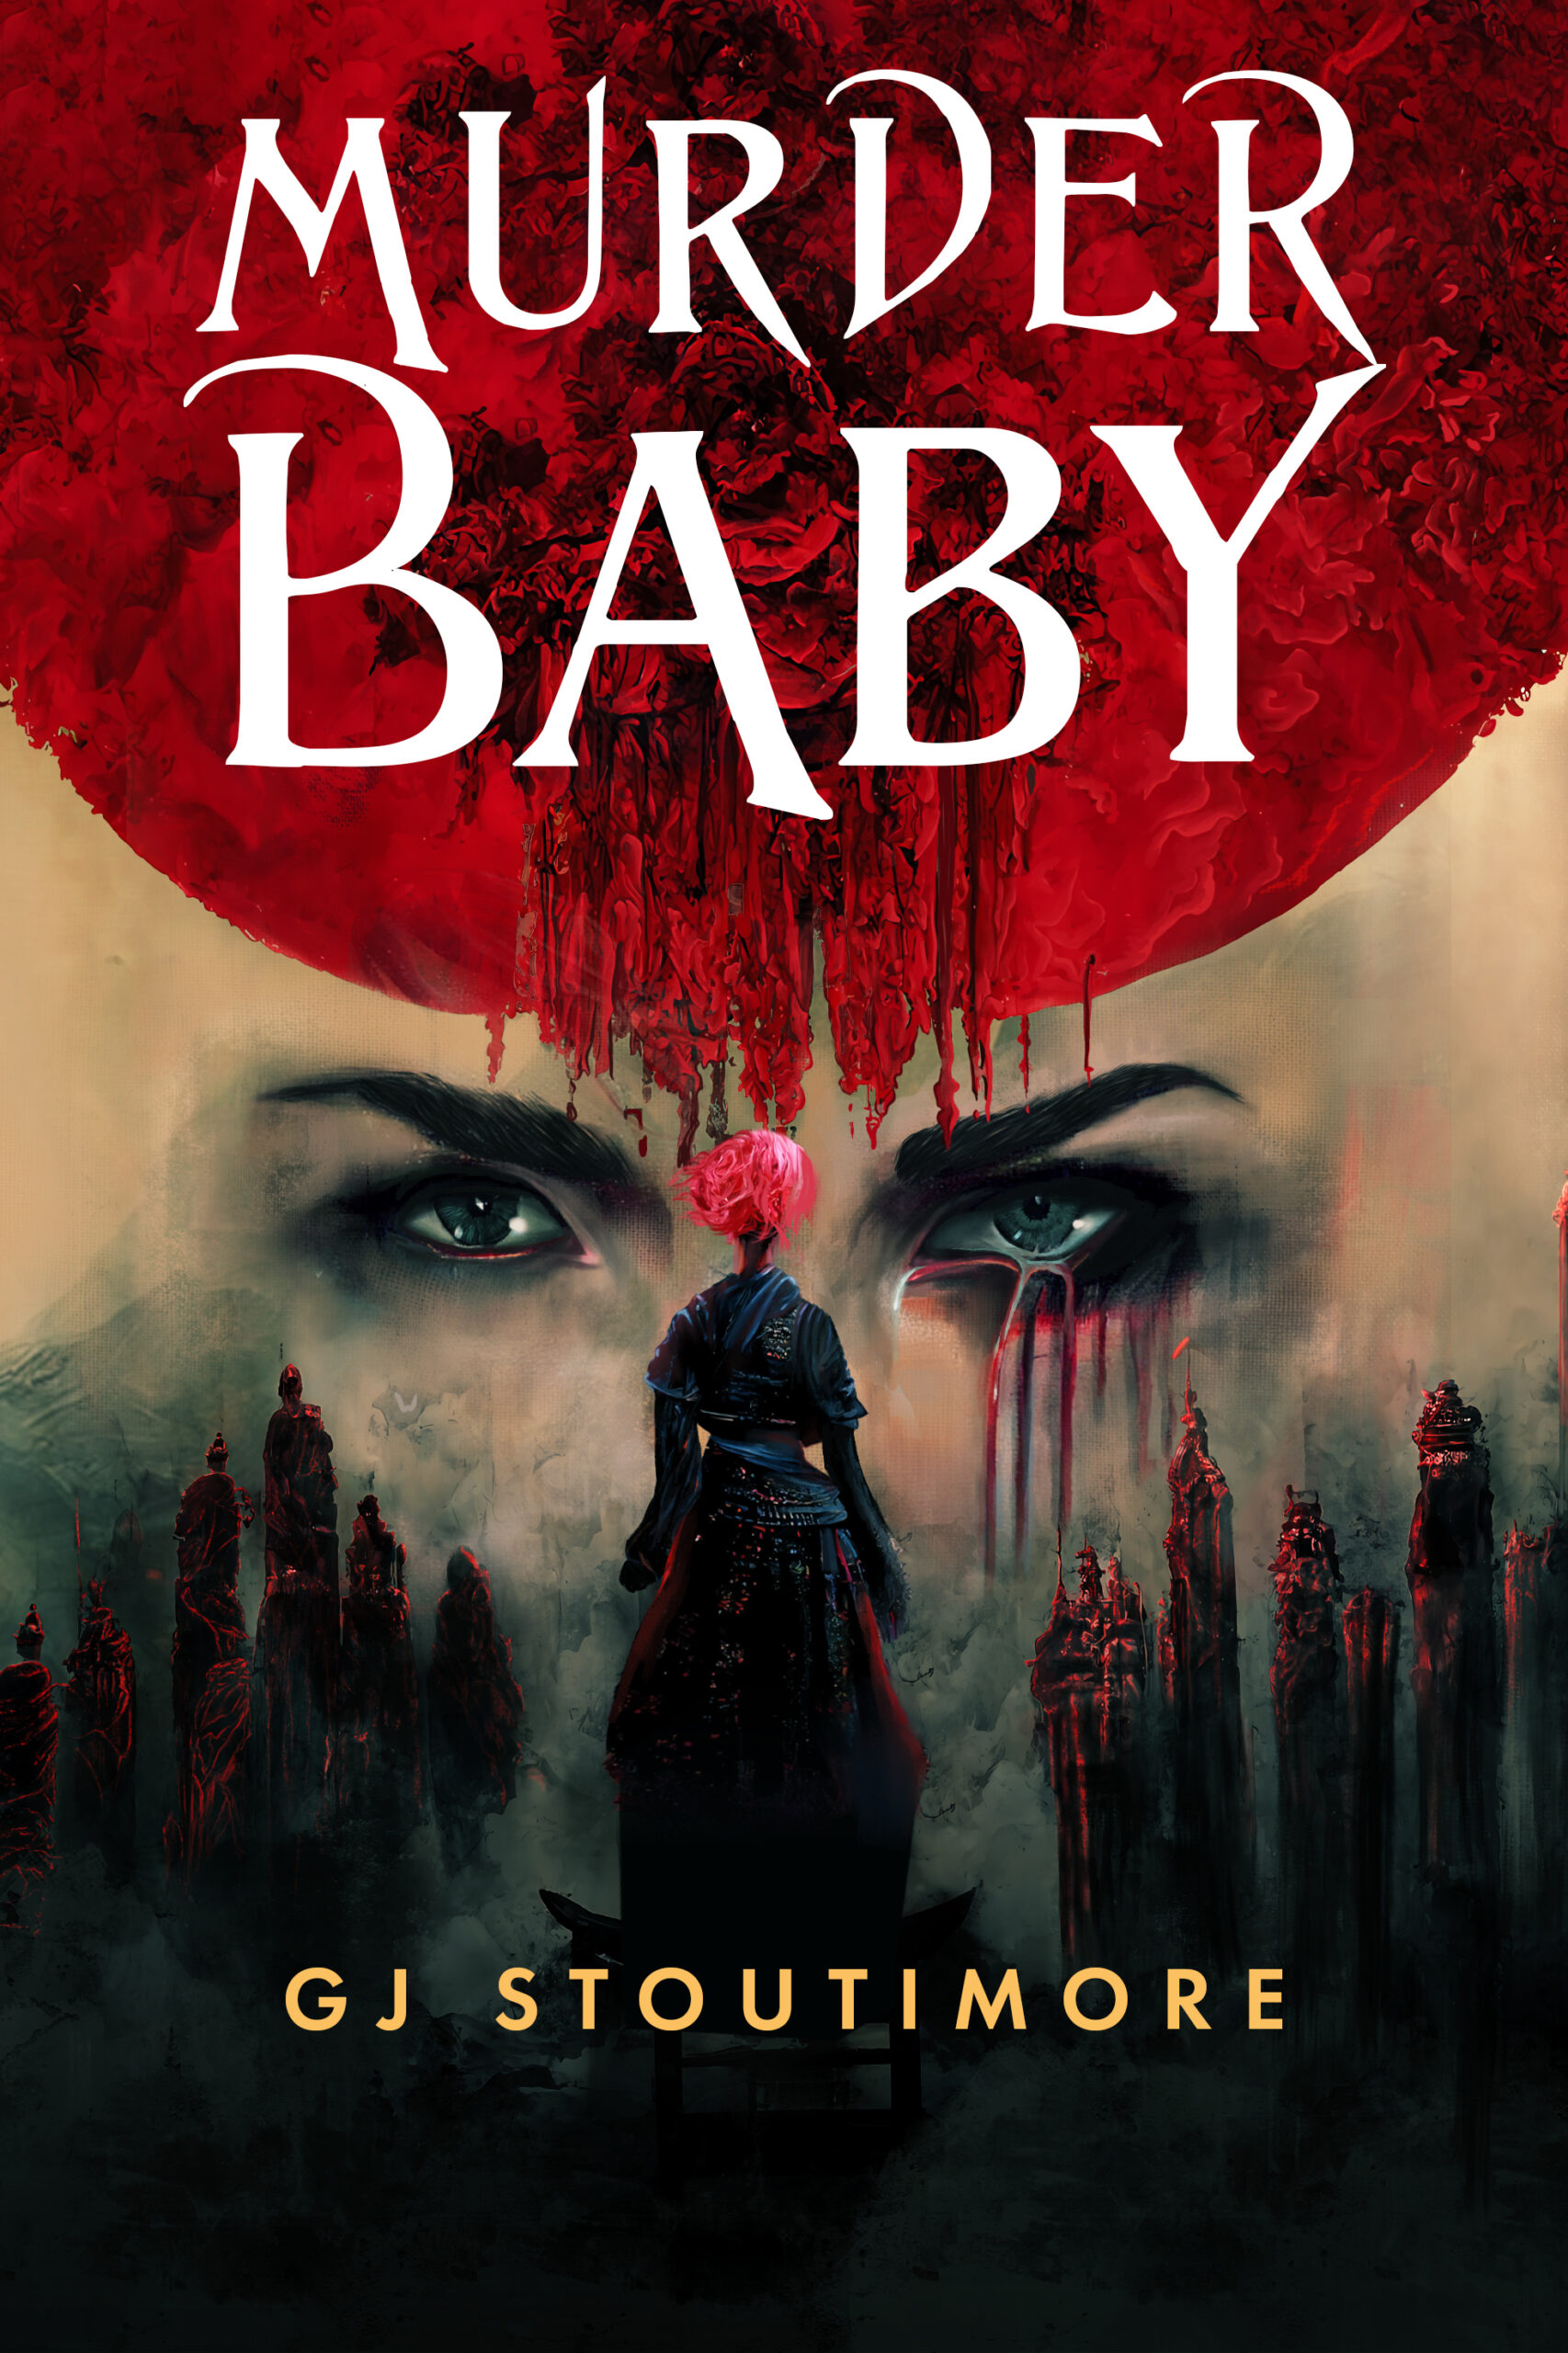 Murder Baby by GJ Stoutimore